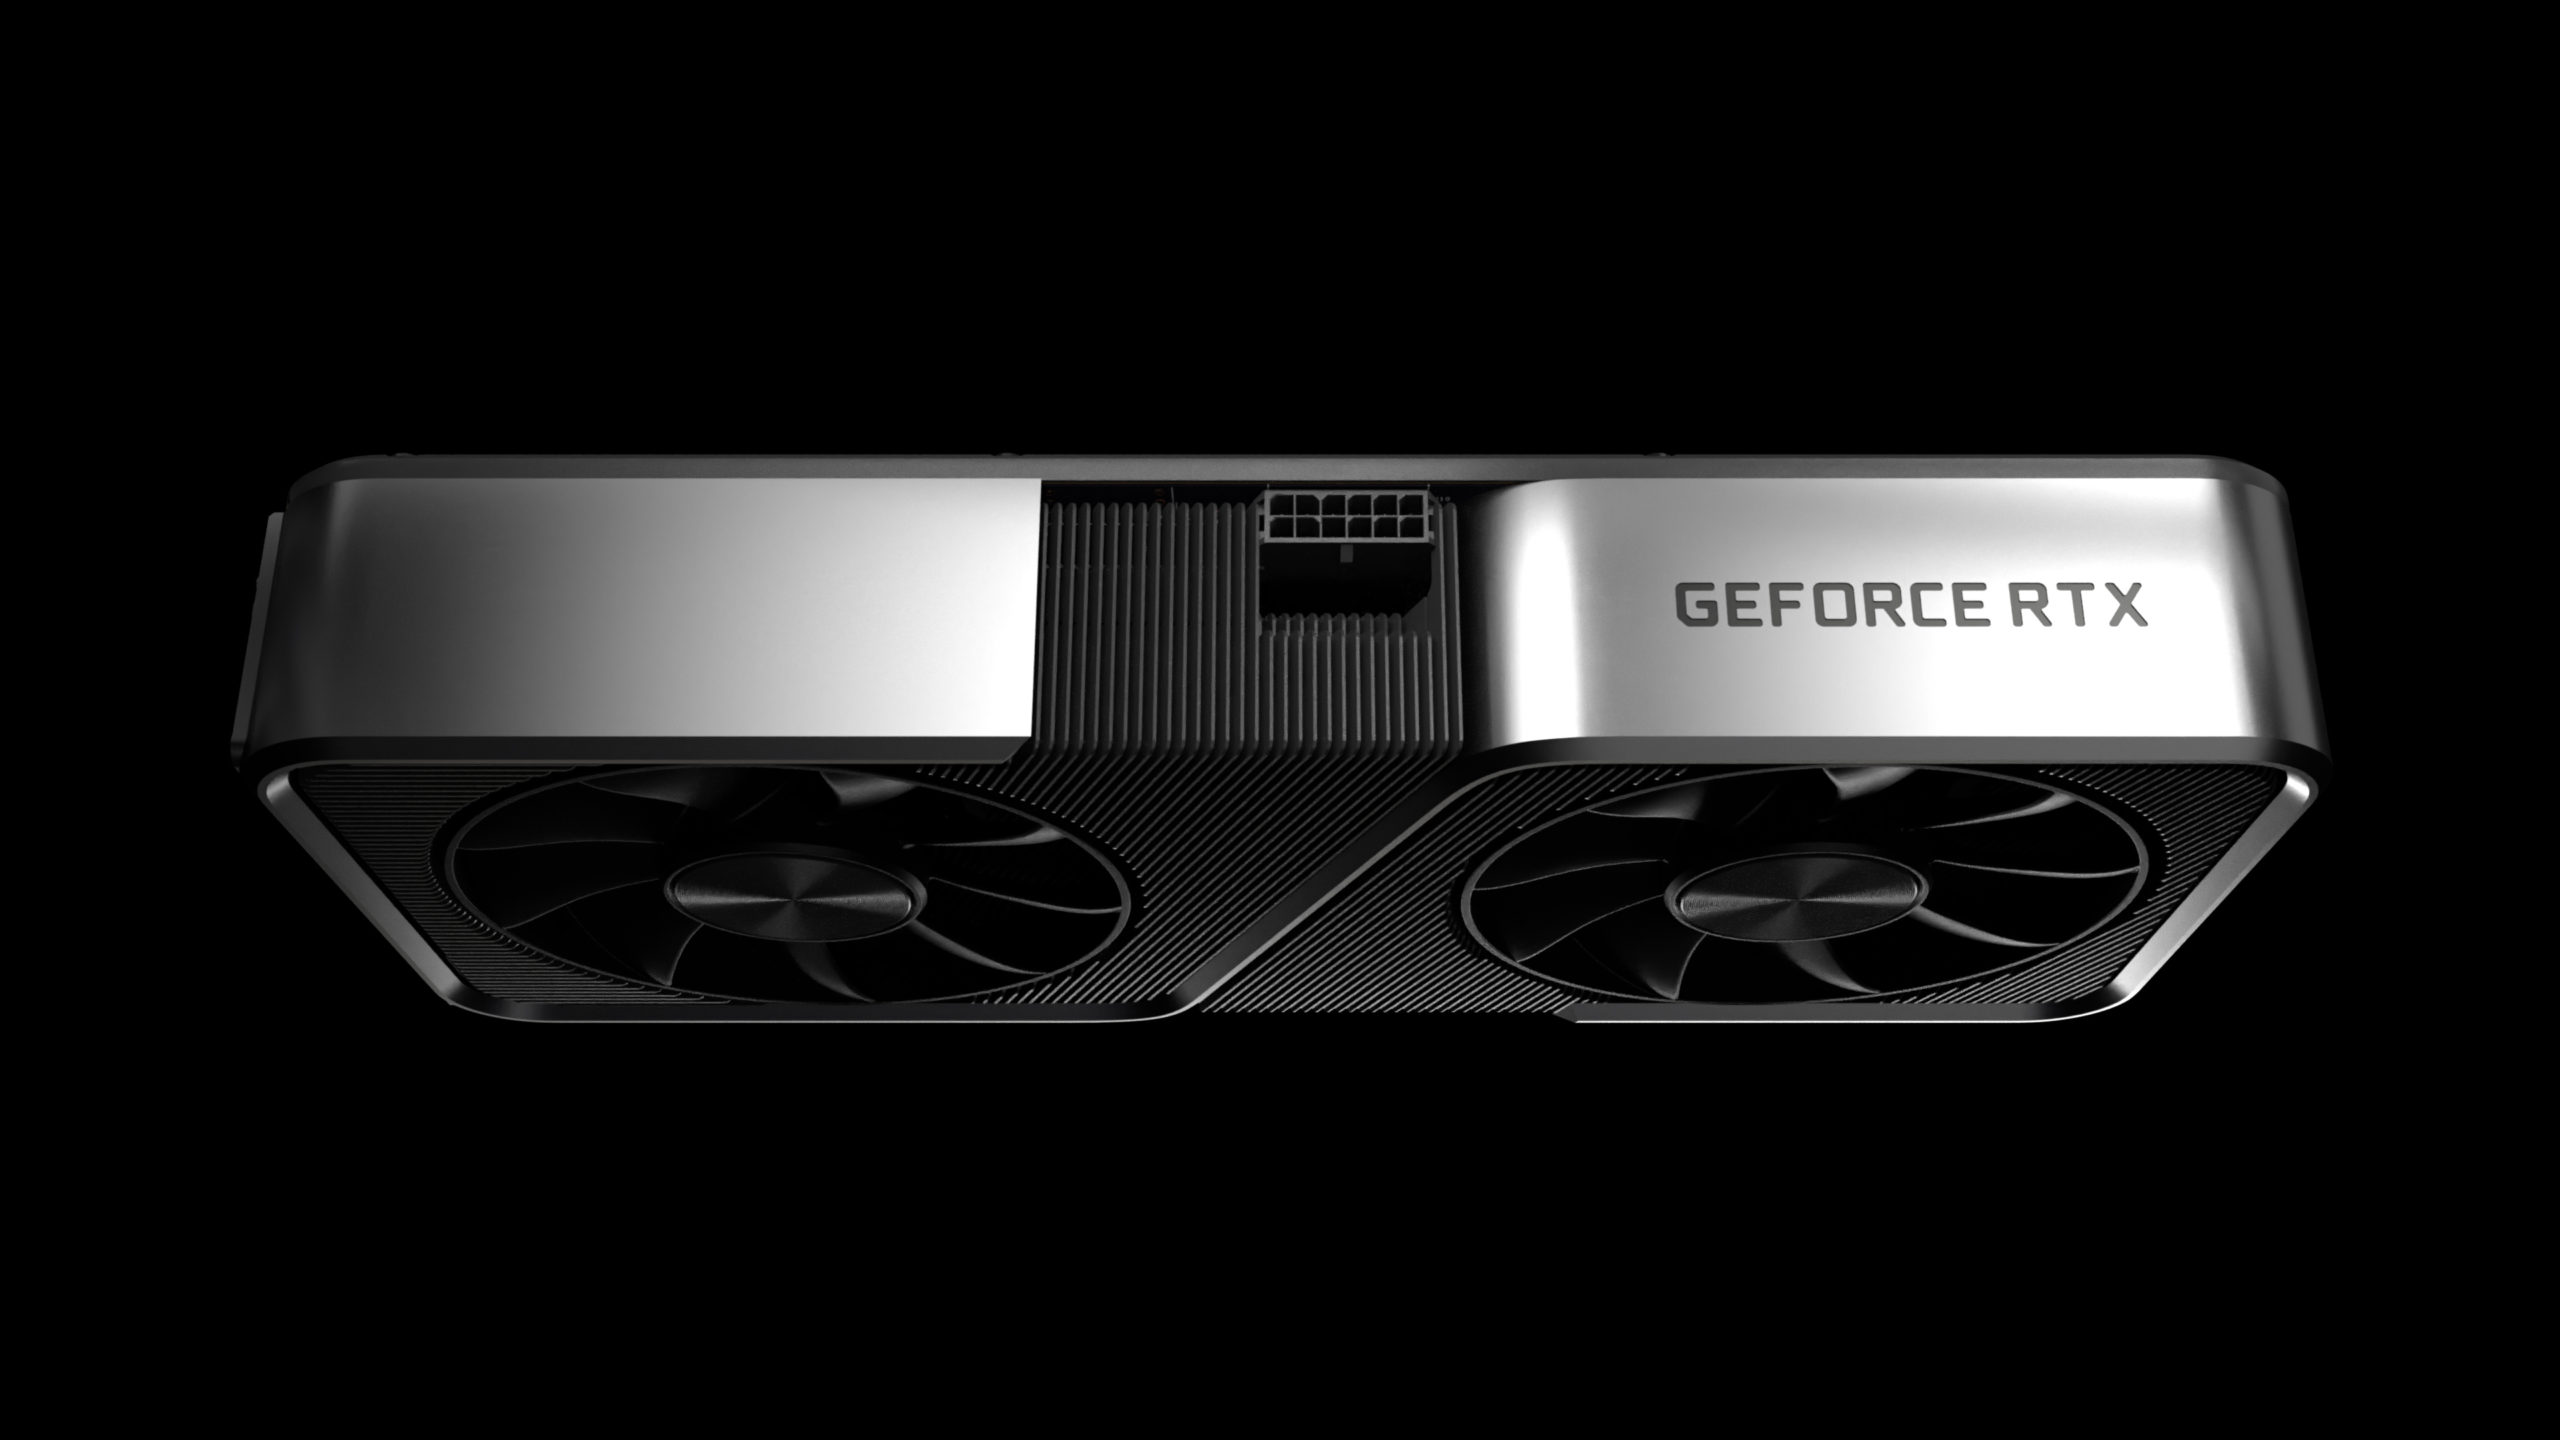 nvidia’s-rtx-3070-out-sold-every-other-gpu-in-march-of-2021